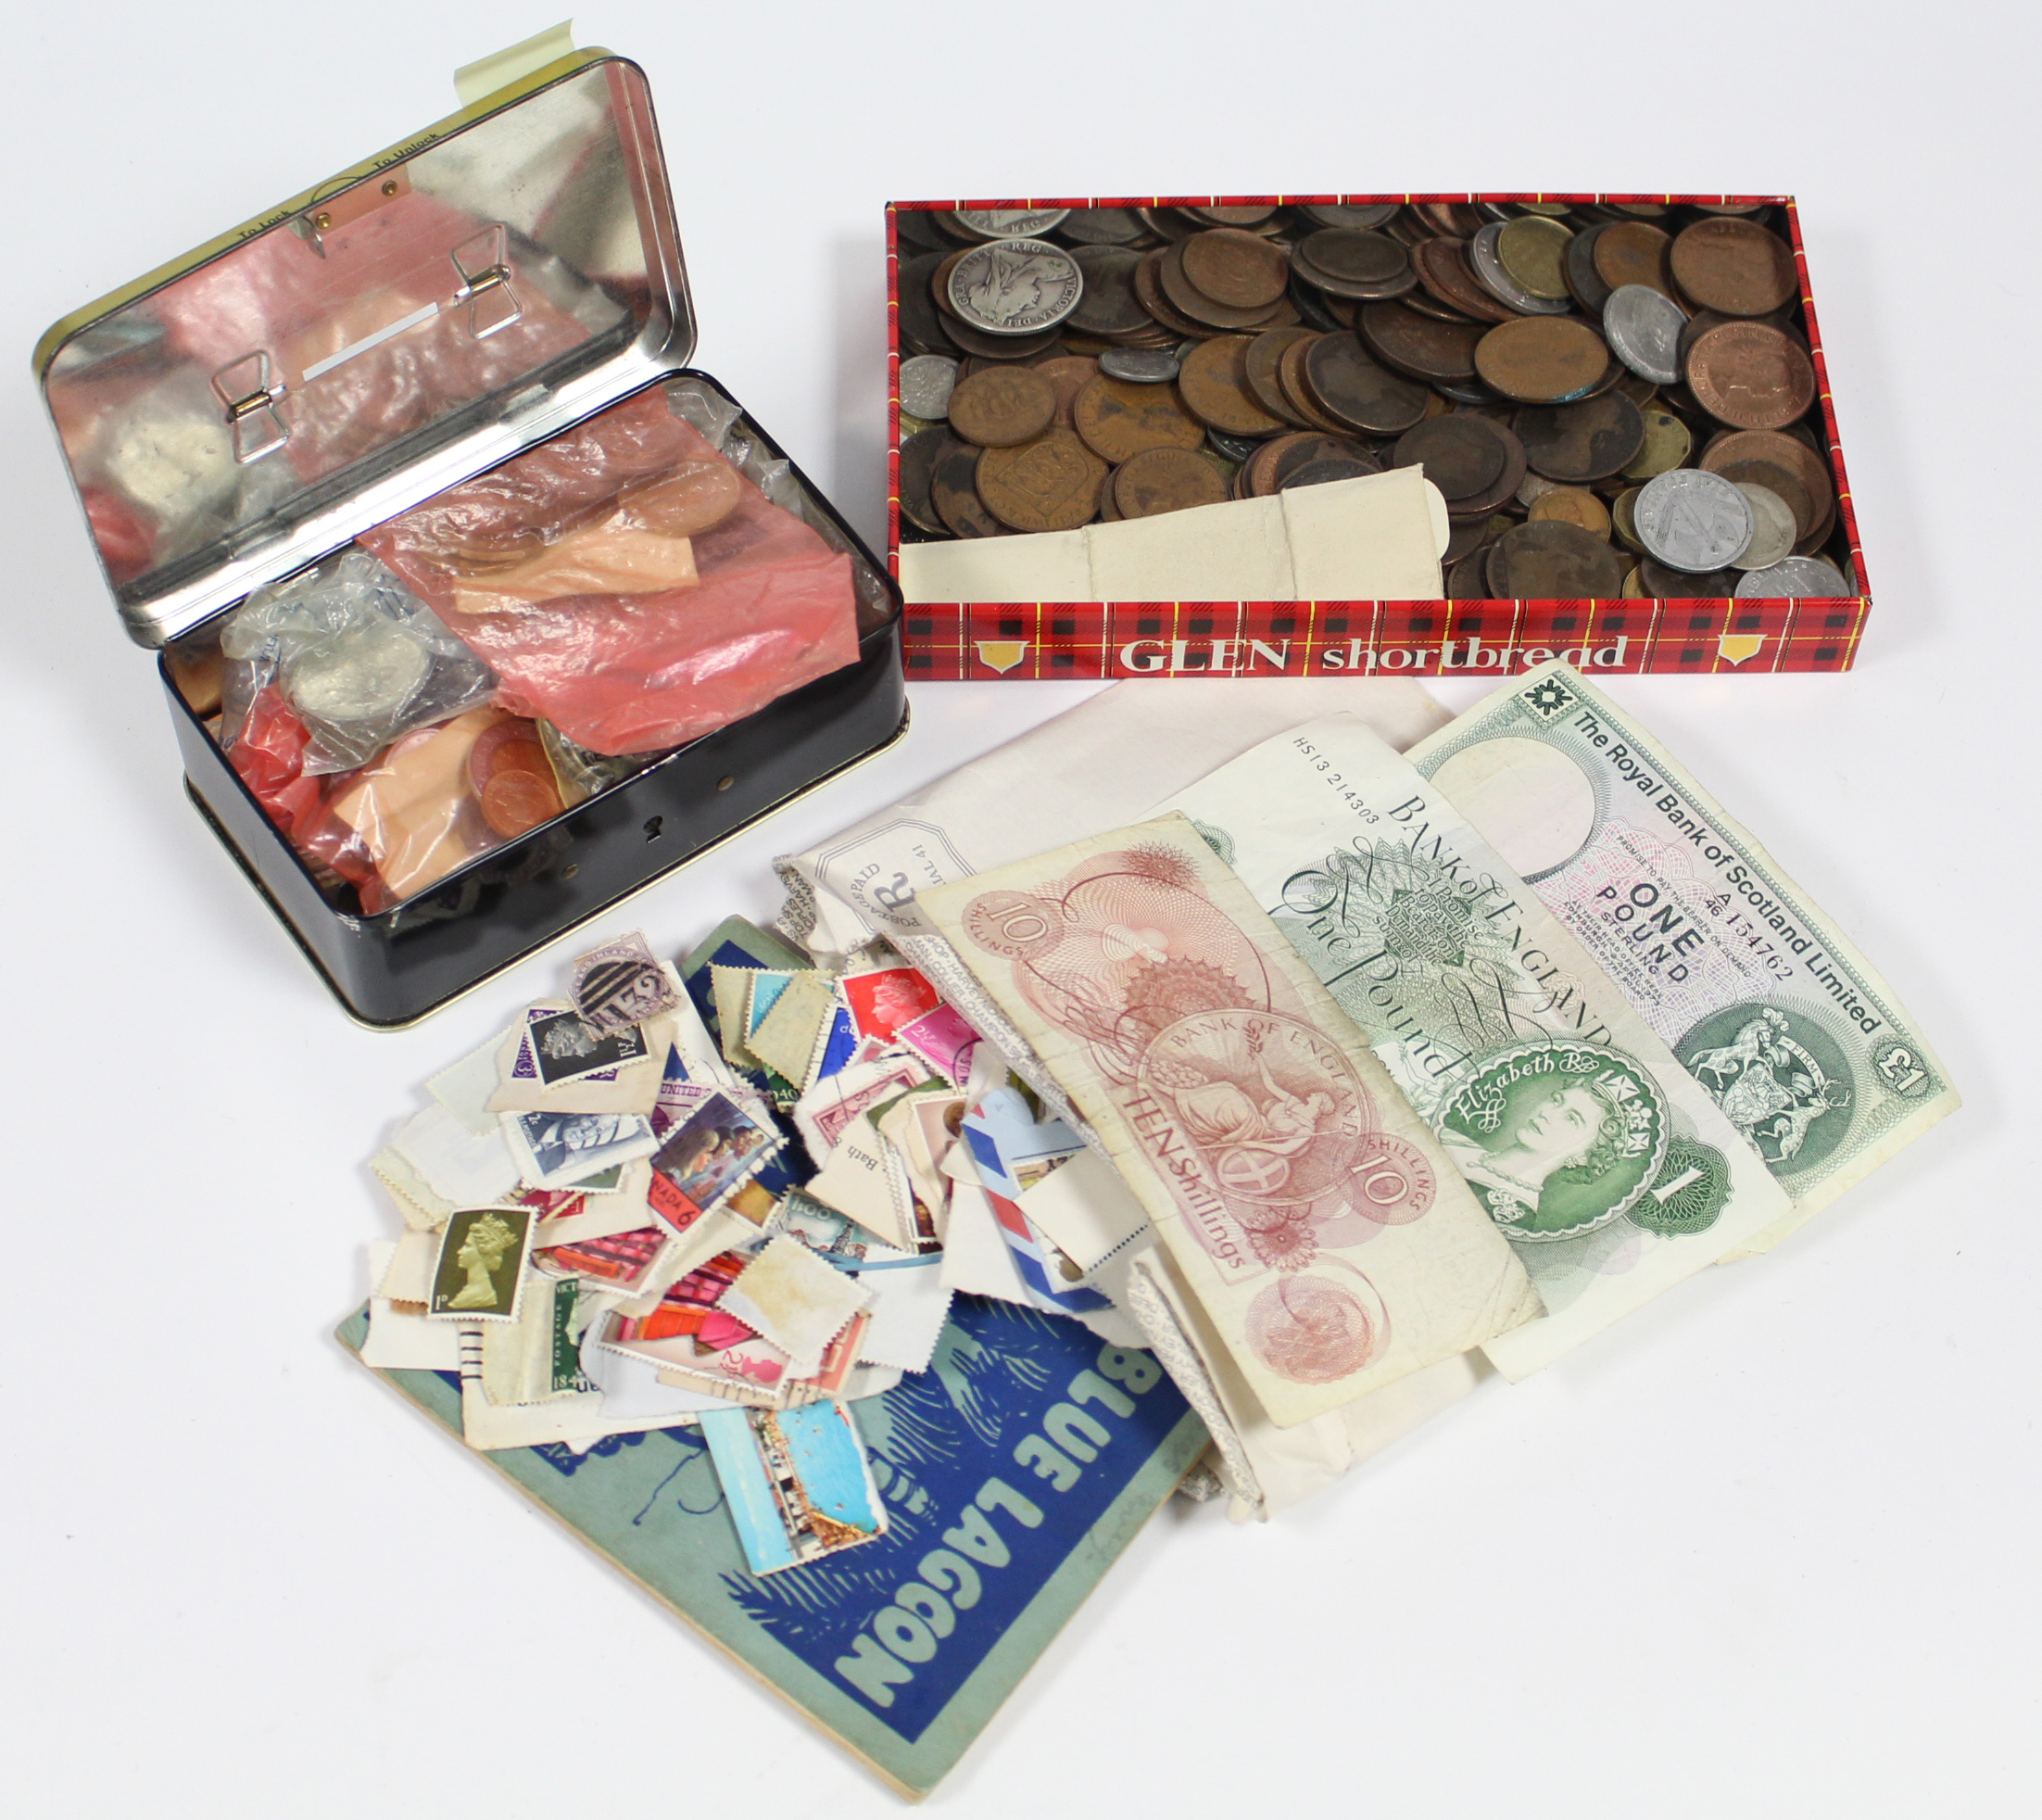 A quantity of British coin s & banknotes; a quantity of foreign coins; & a small quantity of loose